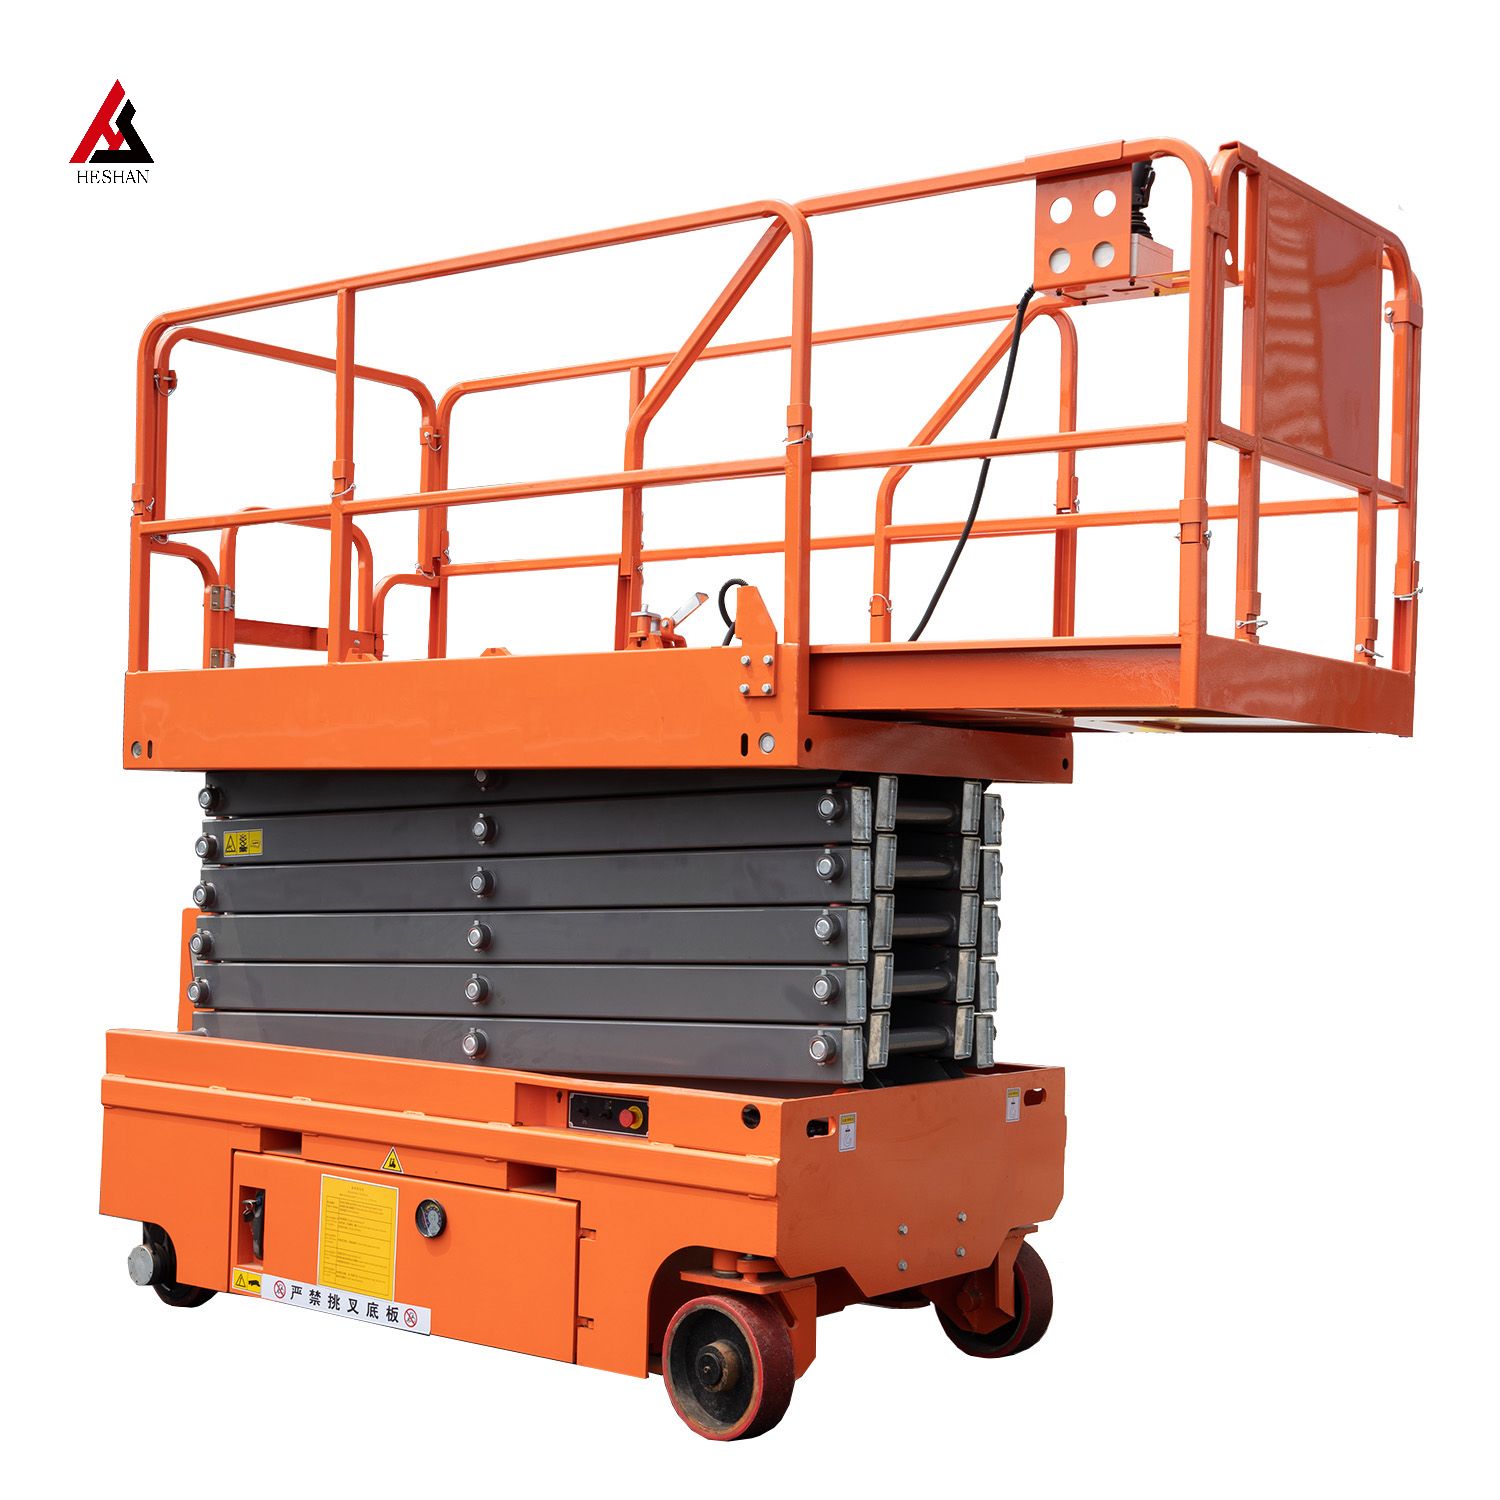 Self-Propelled Hydraulic Scissor Lift Featured Image